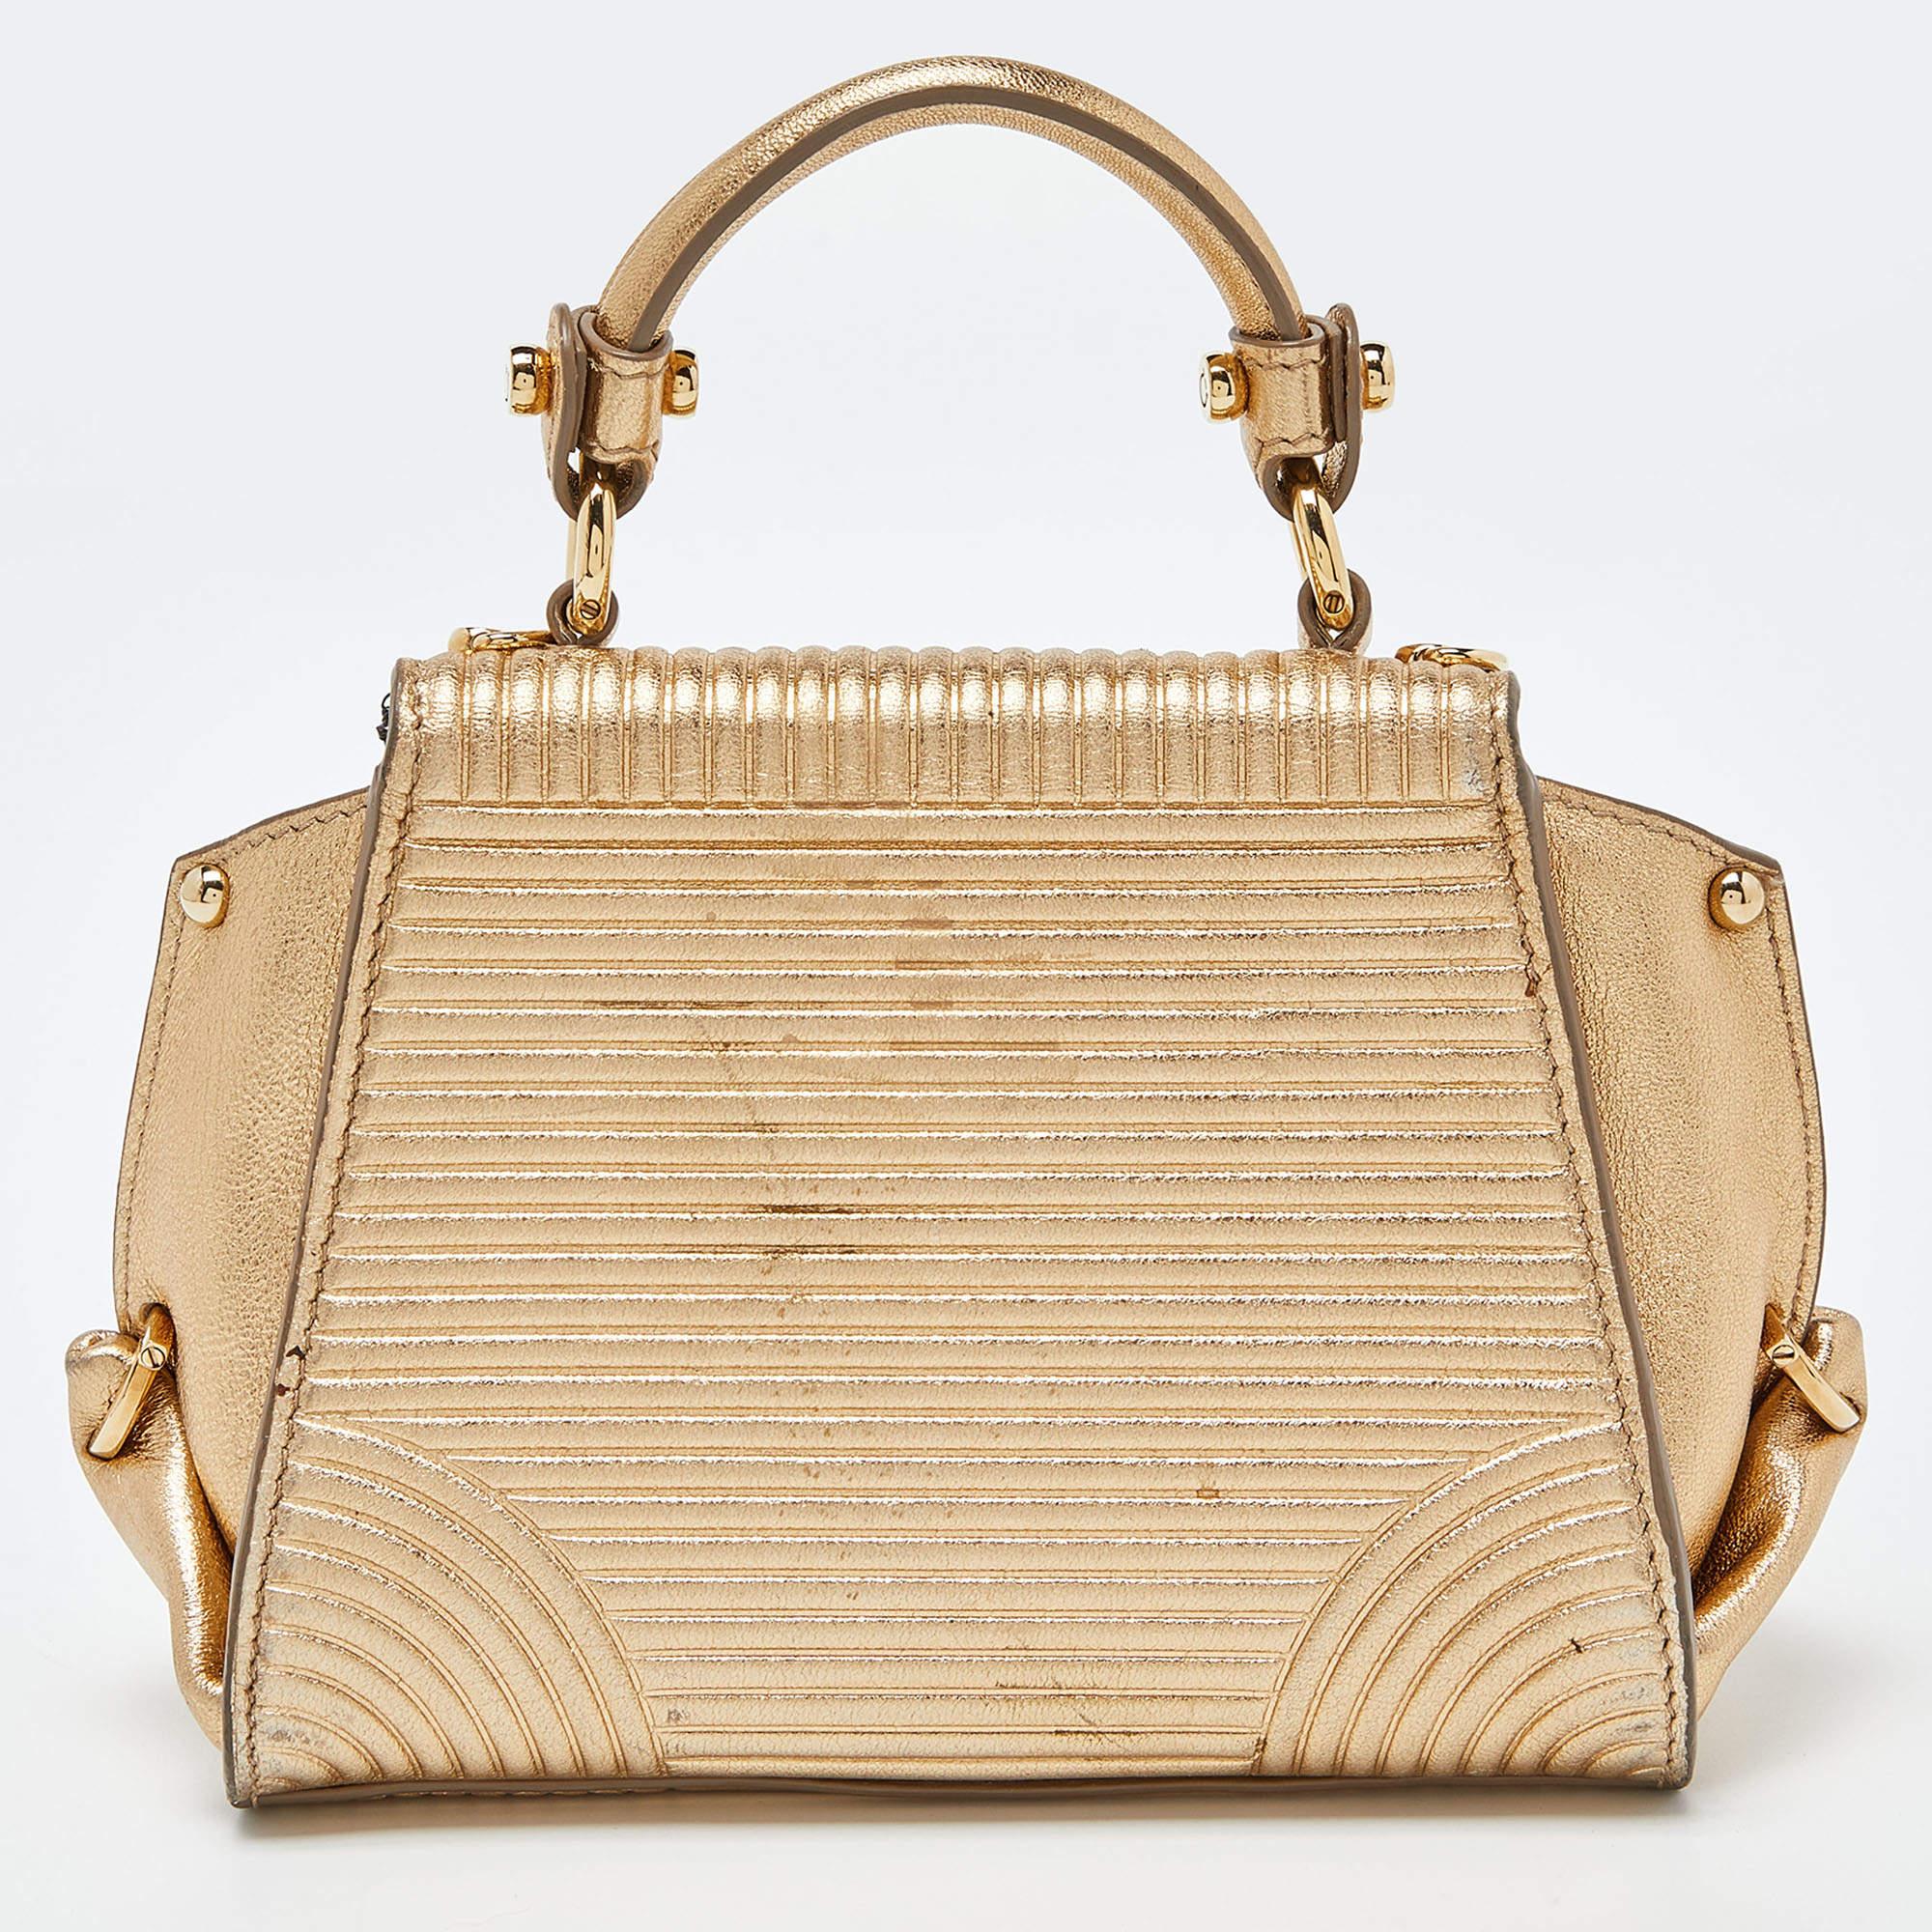 A beautifully made bag that can be used with both day and evening looks, this Salvatore Ferragamo Mini Sofia bag will never fail to impress you. Crafted in gold leather, this bag features a top leather handle and long strap for your convenience.